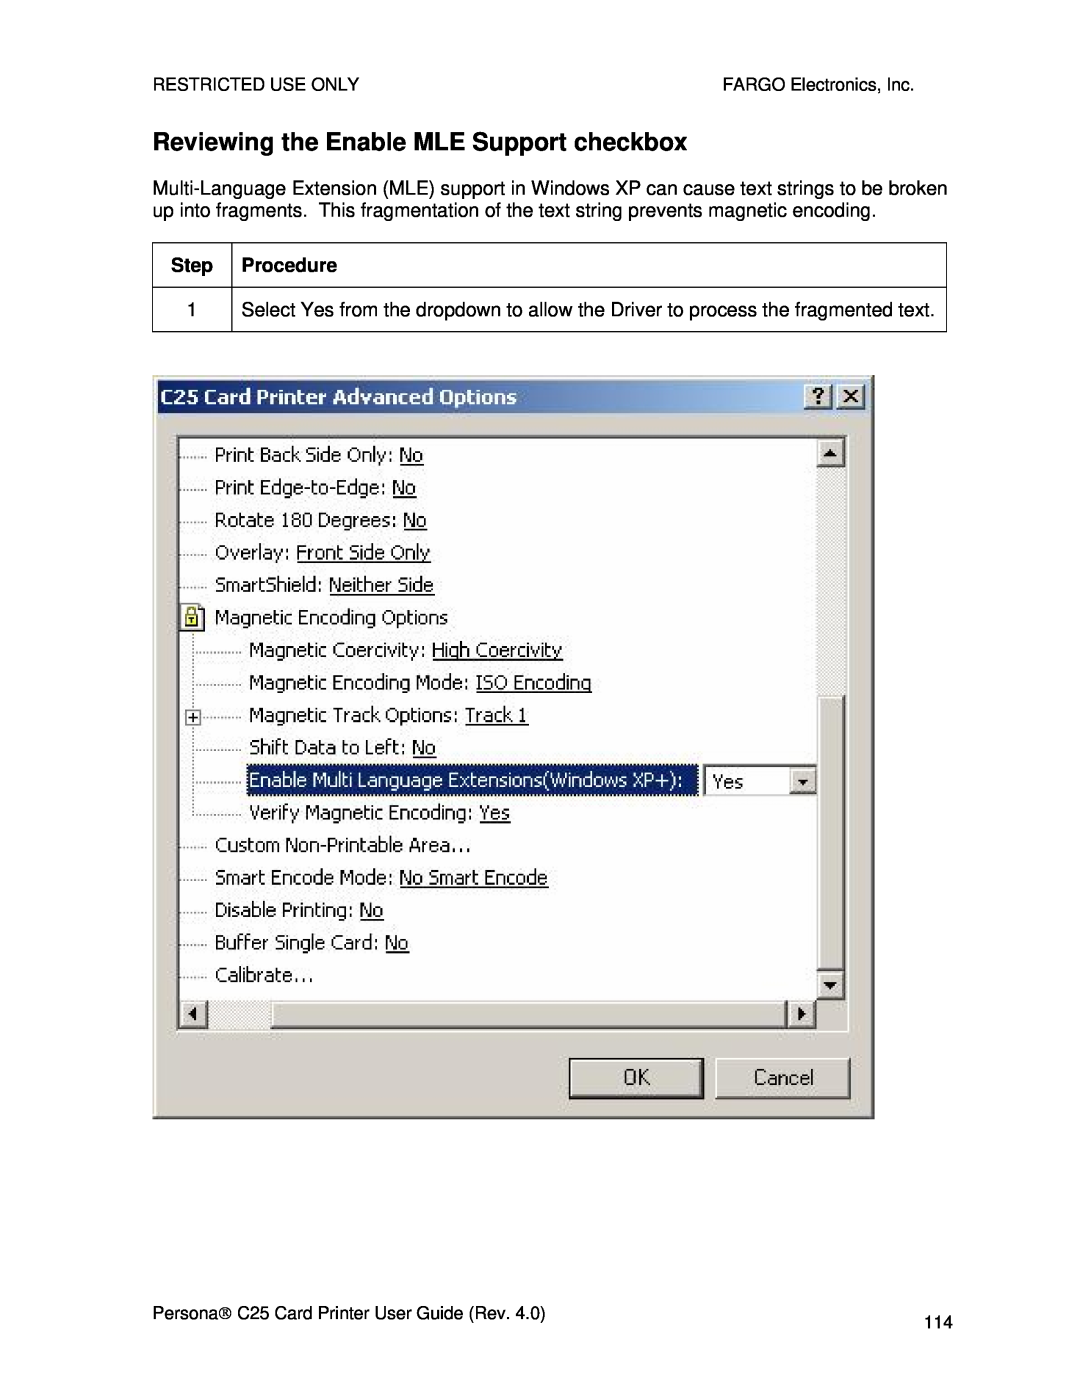 FARGO electronic S000256 manual Reviewing the Enable MLE Support checkbox 